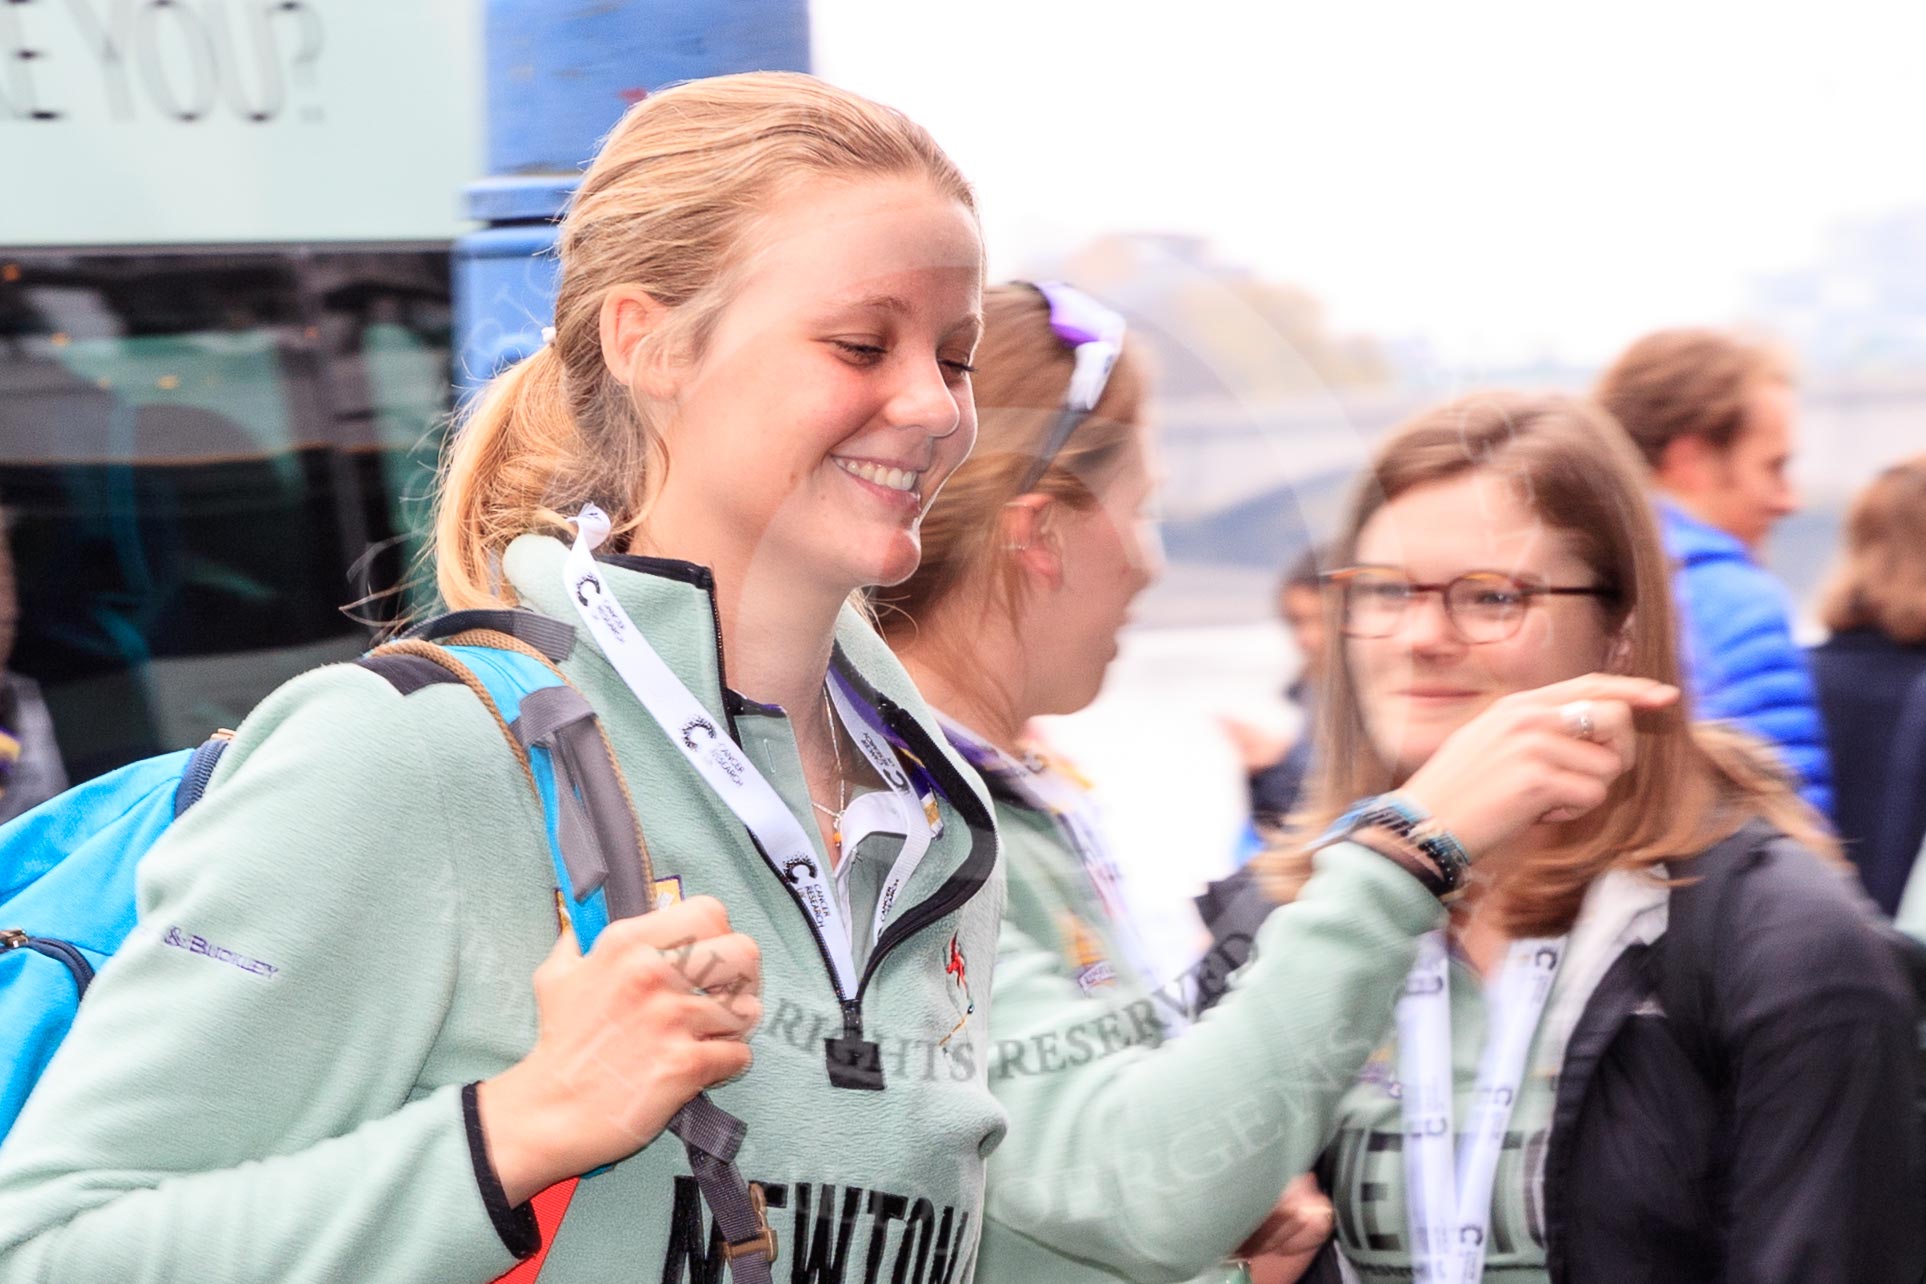 The Cancer Research UK Women's Boat Race 2018: The arrival of the Oxford reserve boat crew, here 3 seat Anne Beenken.
River Thames between Putney Bridge and Mortlake,
London SW15,

United Kingdom,
on 24 March 2018 at 14:04, image #19